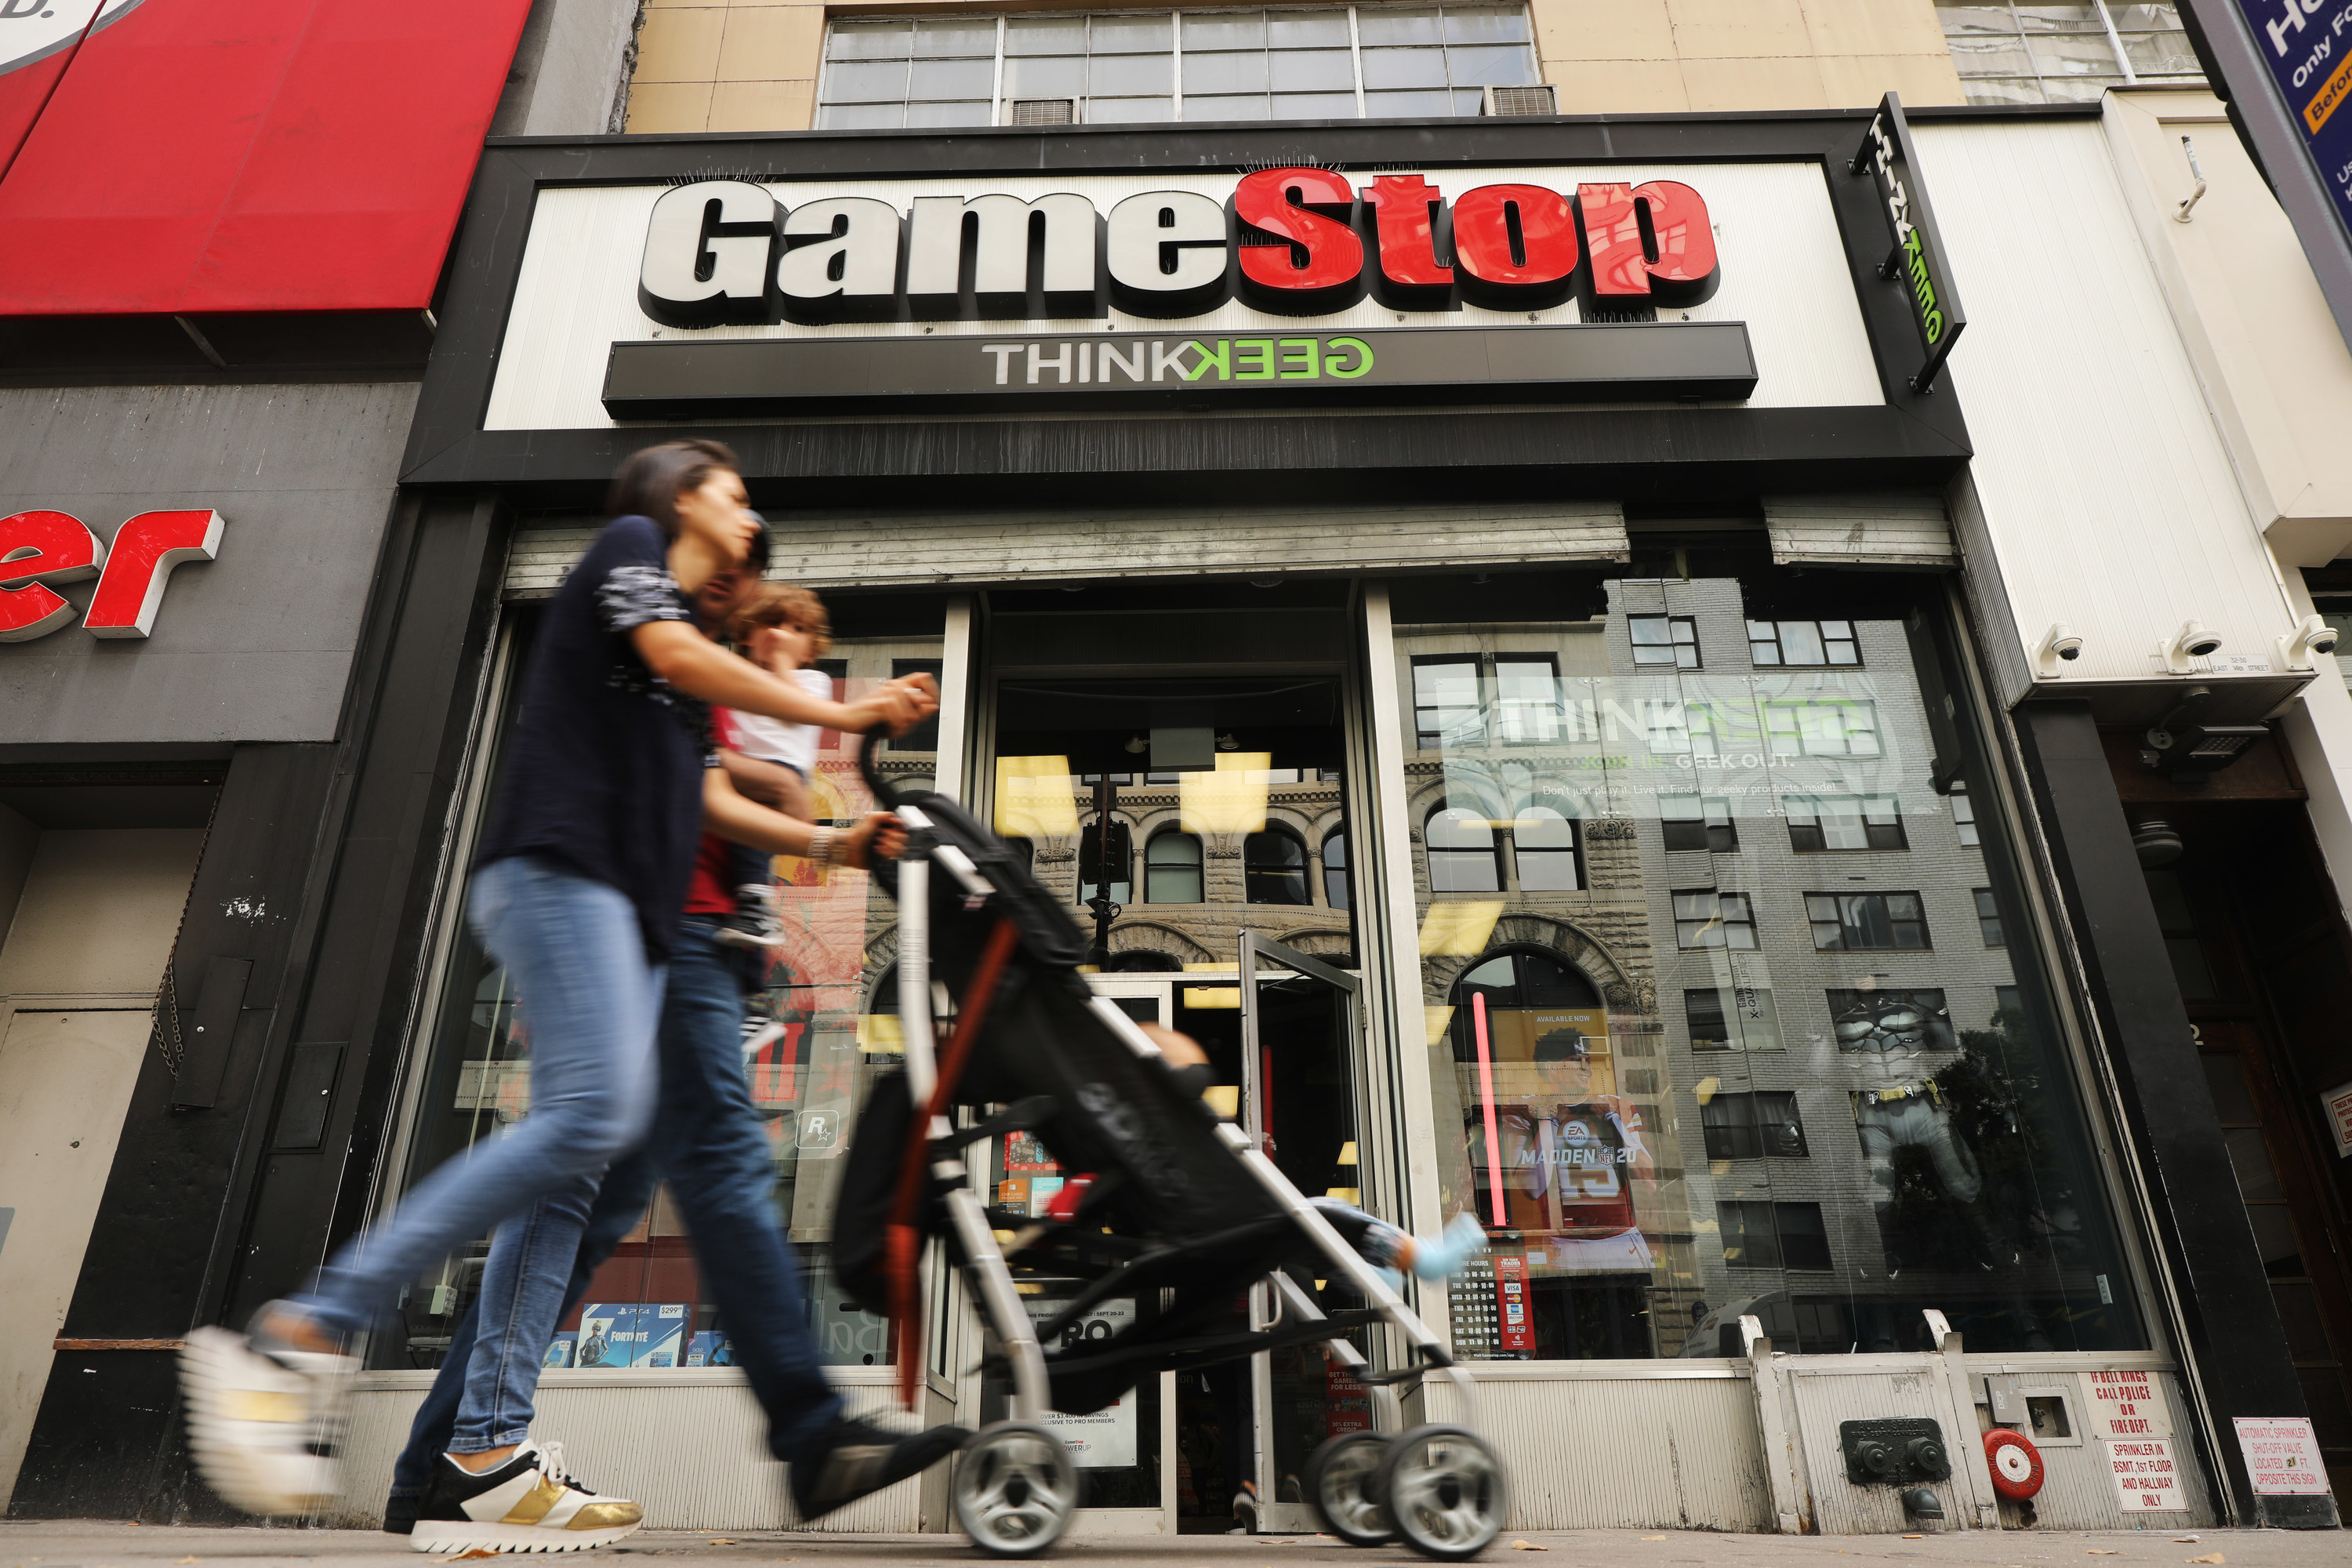 A couple pushing a stroller walk past a GameStop store